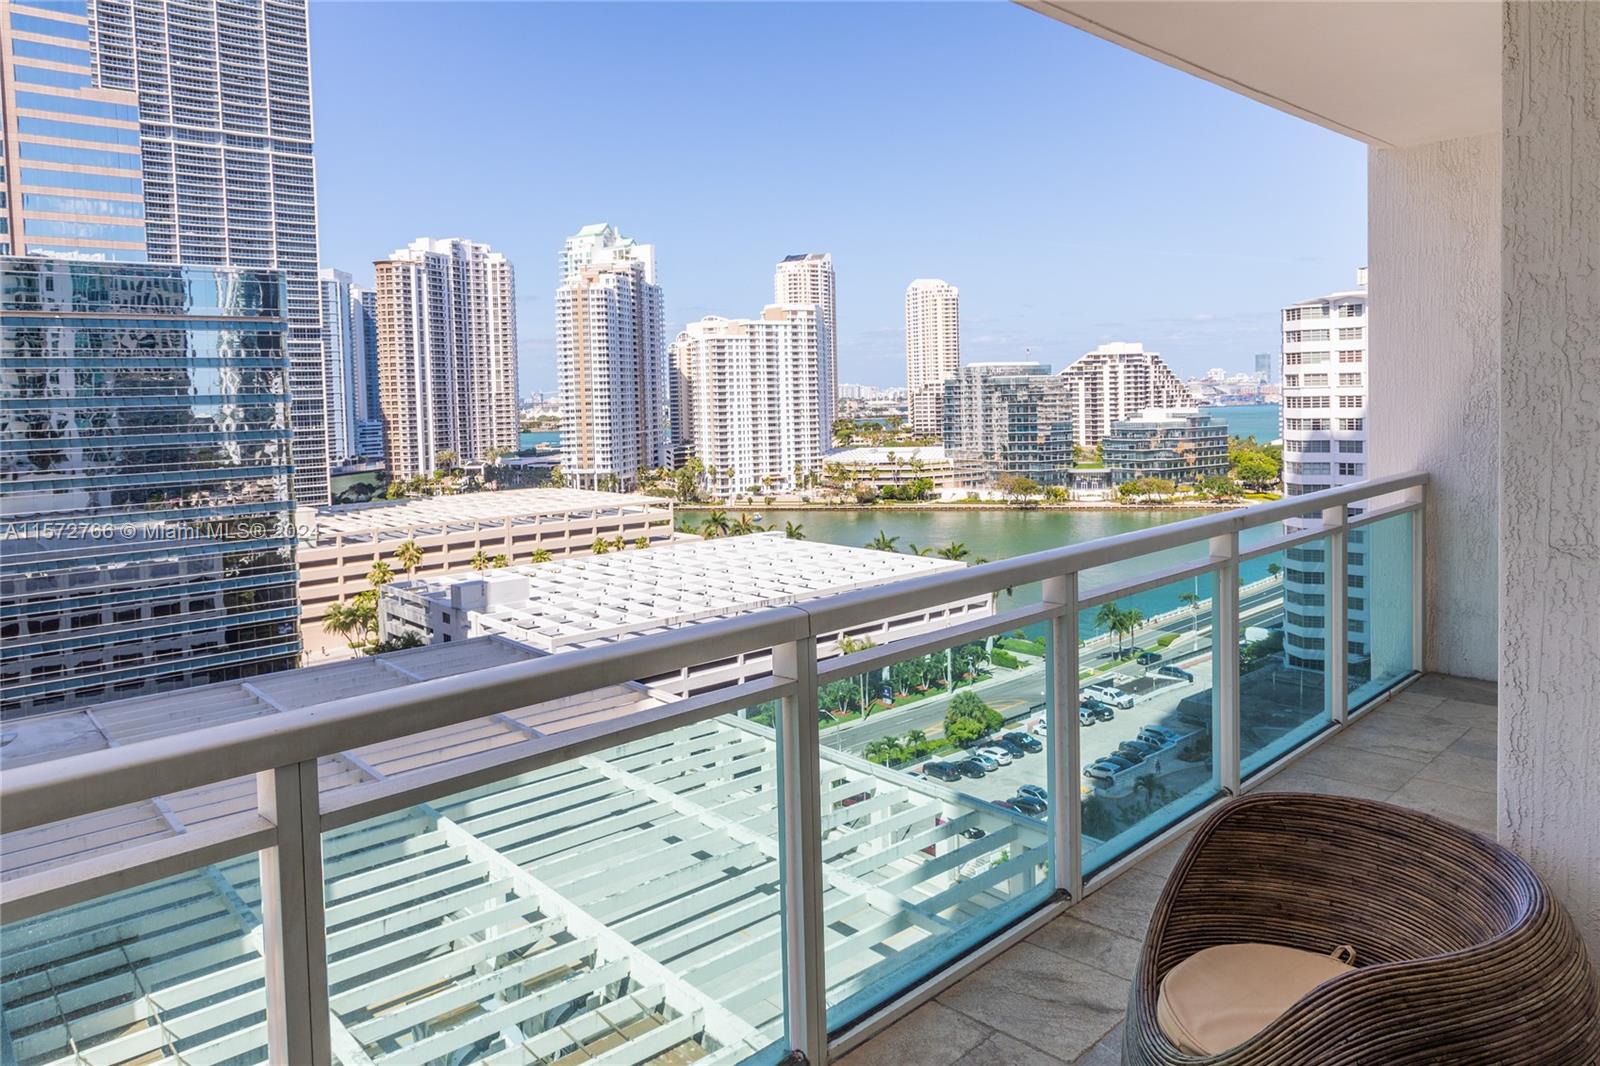 Nestled in the heart of Brickell, central location for adventurers and a tranquil oasis for those seeking relaxation. Walking distance to Miami's bustling financial district, restaurants, Publix and the stunning Biscayne Bay waterfront. Dive into relaxation with two sparkling pools and a jacuzzi. The unit features TVs in every room with cable. The kitchen is fully equipped with appliances, cookware and utensils. Washer and dryer is in unit. Equipped with 2 walk-in closets and 2 desks. The building offers a playroom, full gym, a business lounge including printer access and conference room, a cinema and party room. The pool area includes 2 heated pools, a jacuzzi, hammocks, lounge chairs and cabanas and a communal grill. Available May 2024 to January 2025 lease.